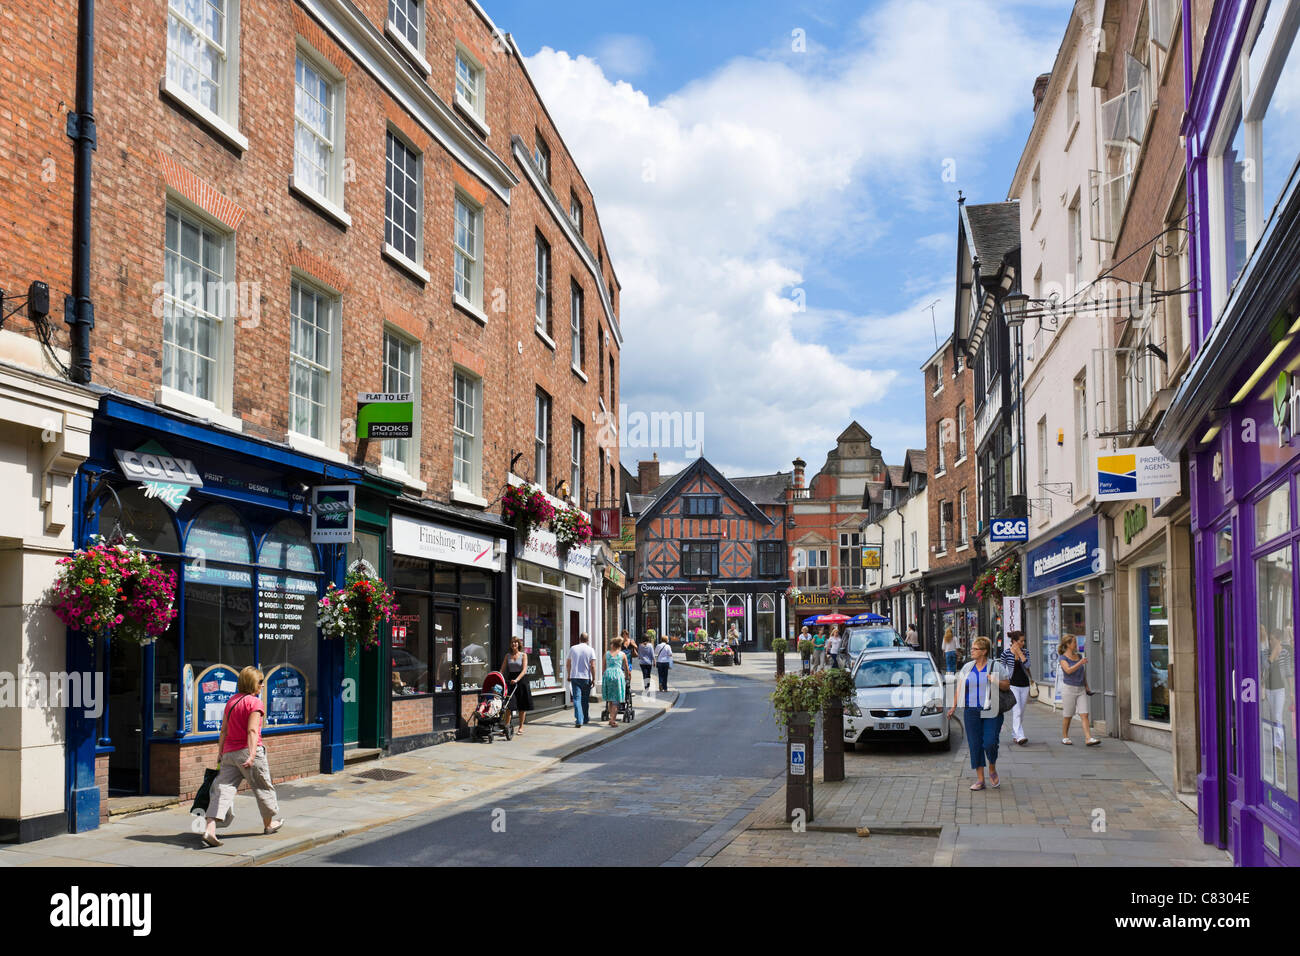 Shops on the High Street in the town centre, Shrewsbury, Shropshire, England, UK Stock Photo